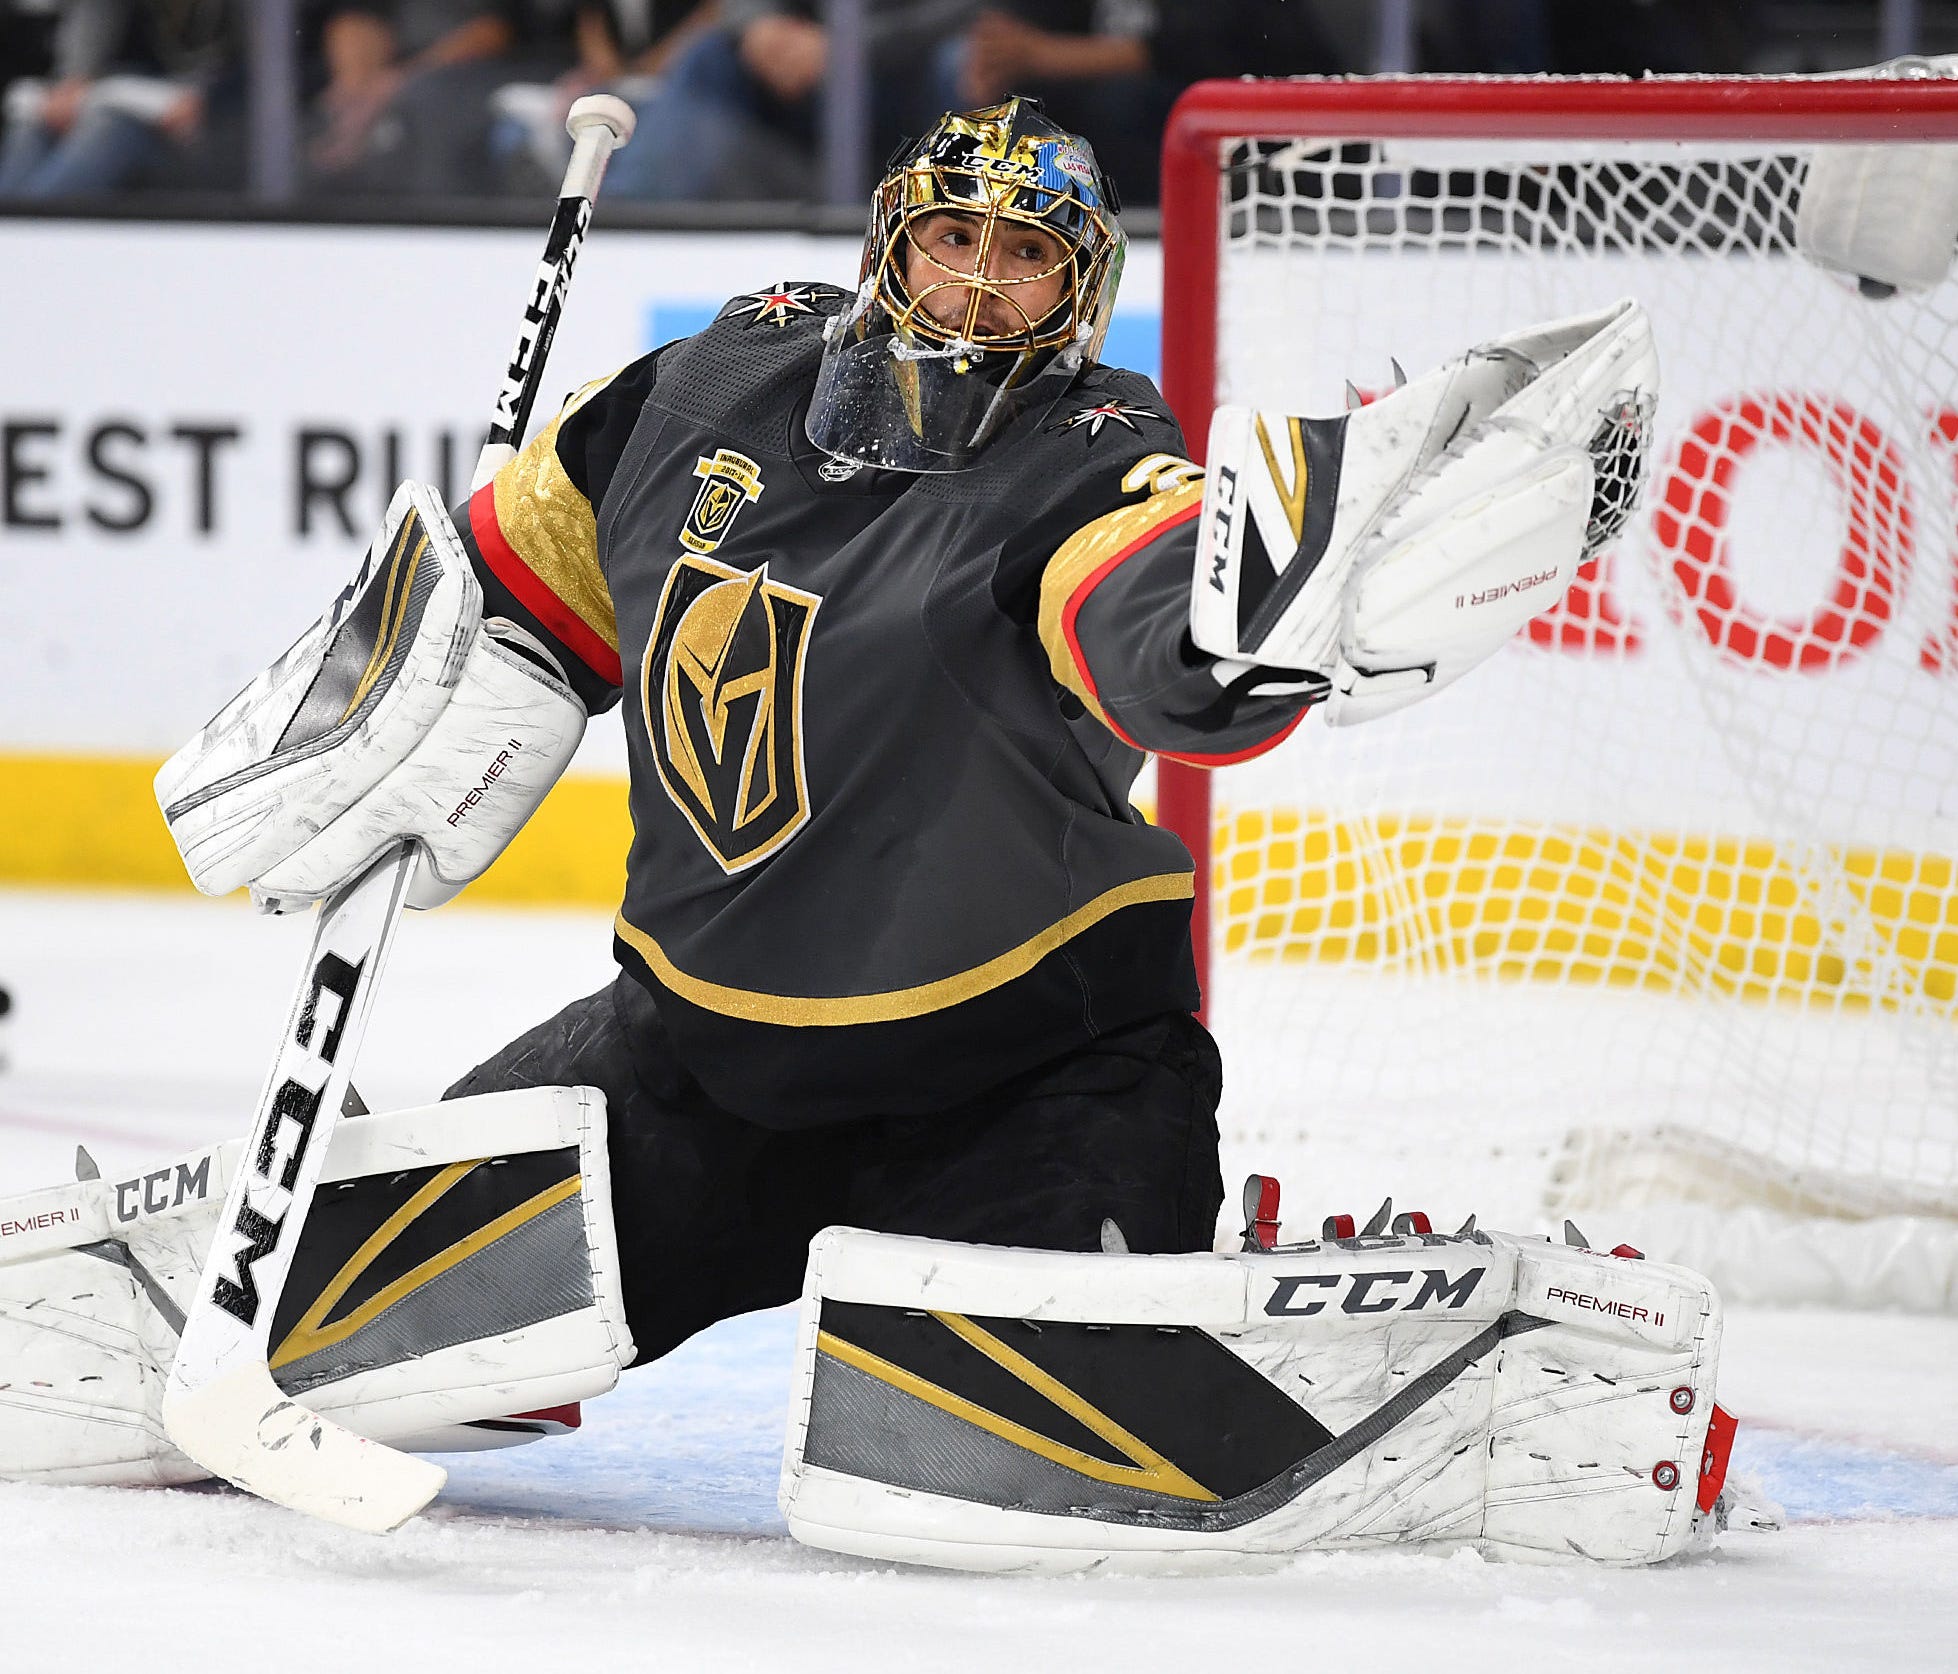 Vegas Golden Knights goaltender Marc-Andre Fleury could win his third consecutive Stanley Cup.